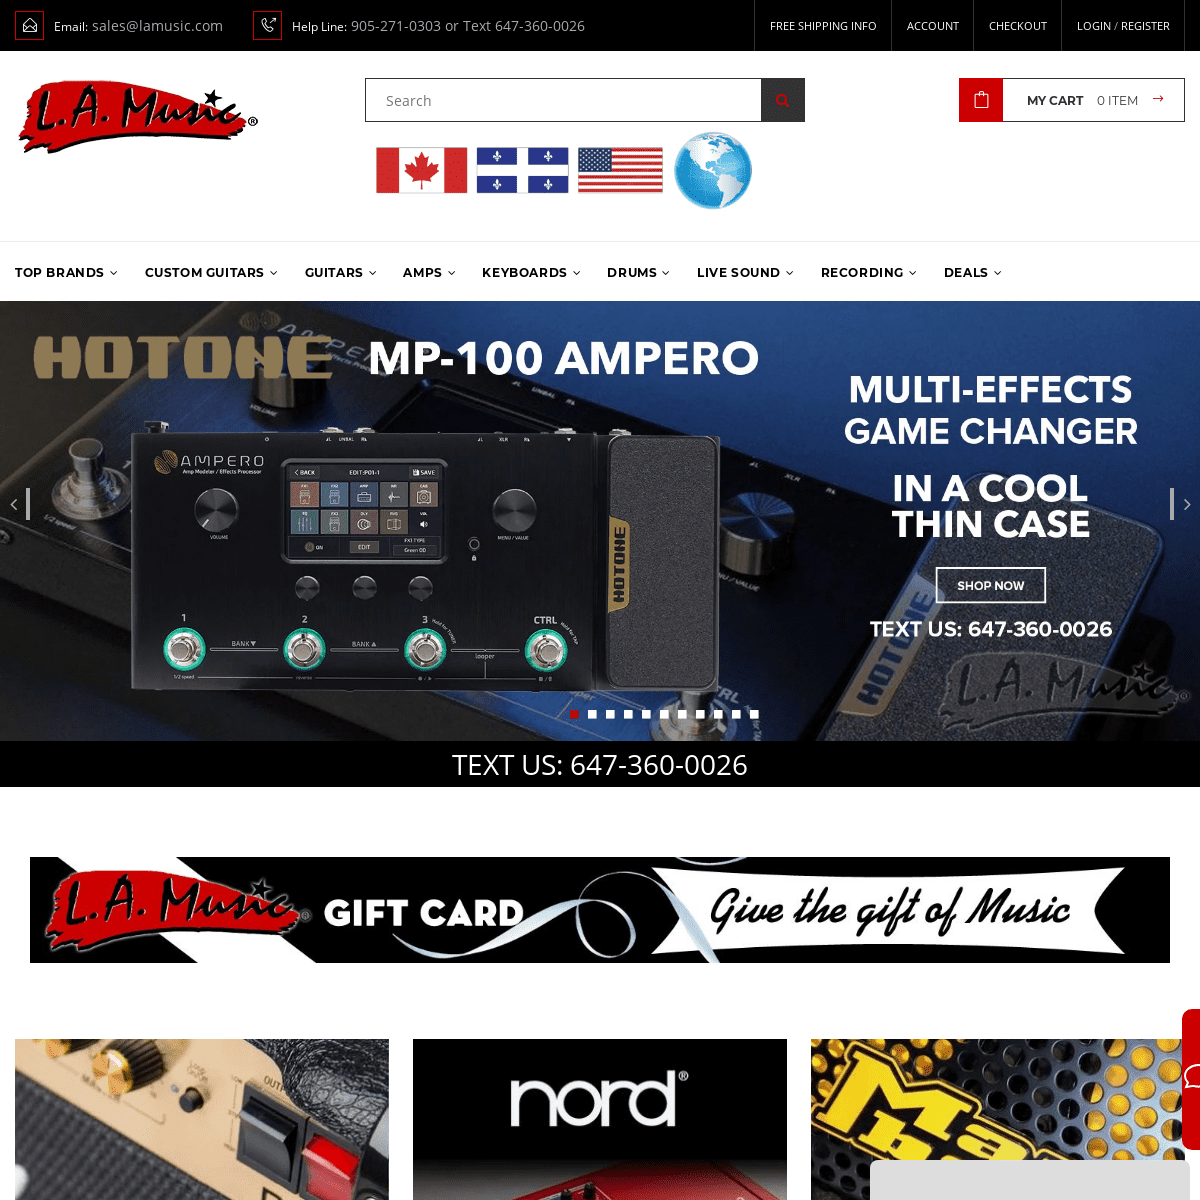 L.A. Music - Canada's Favourite Music Store! | Buy Musical Instruments Online with Confidence - L.A. Music Canada